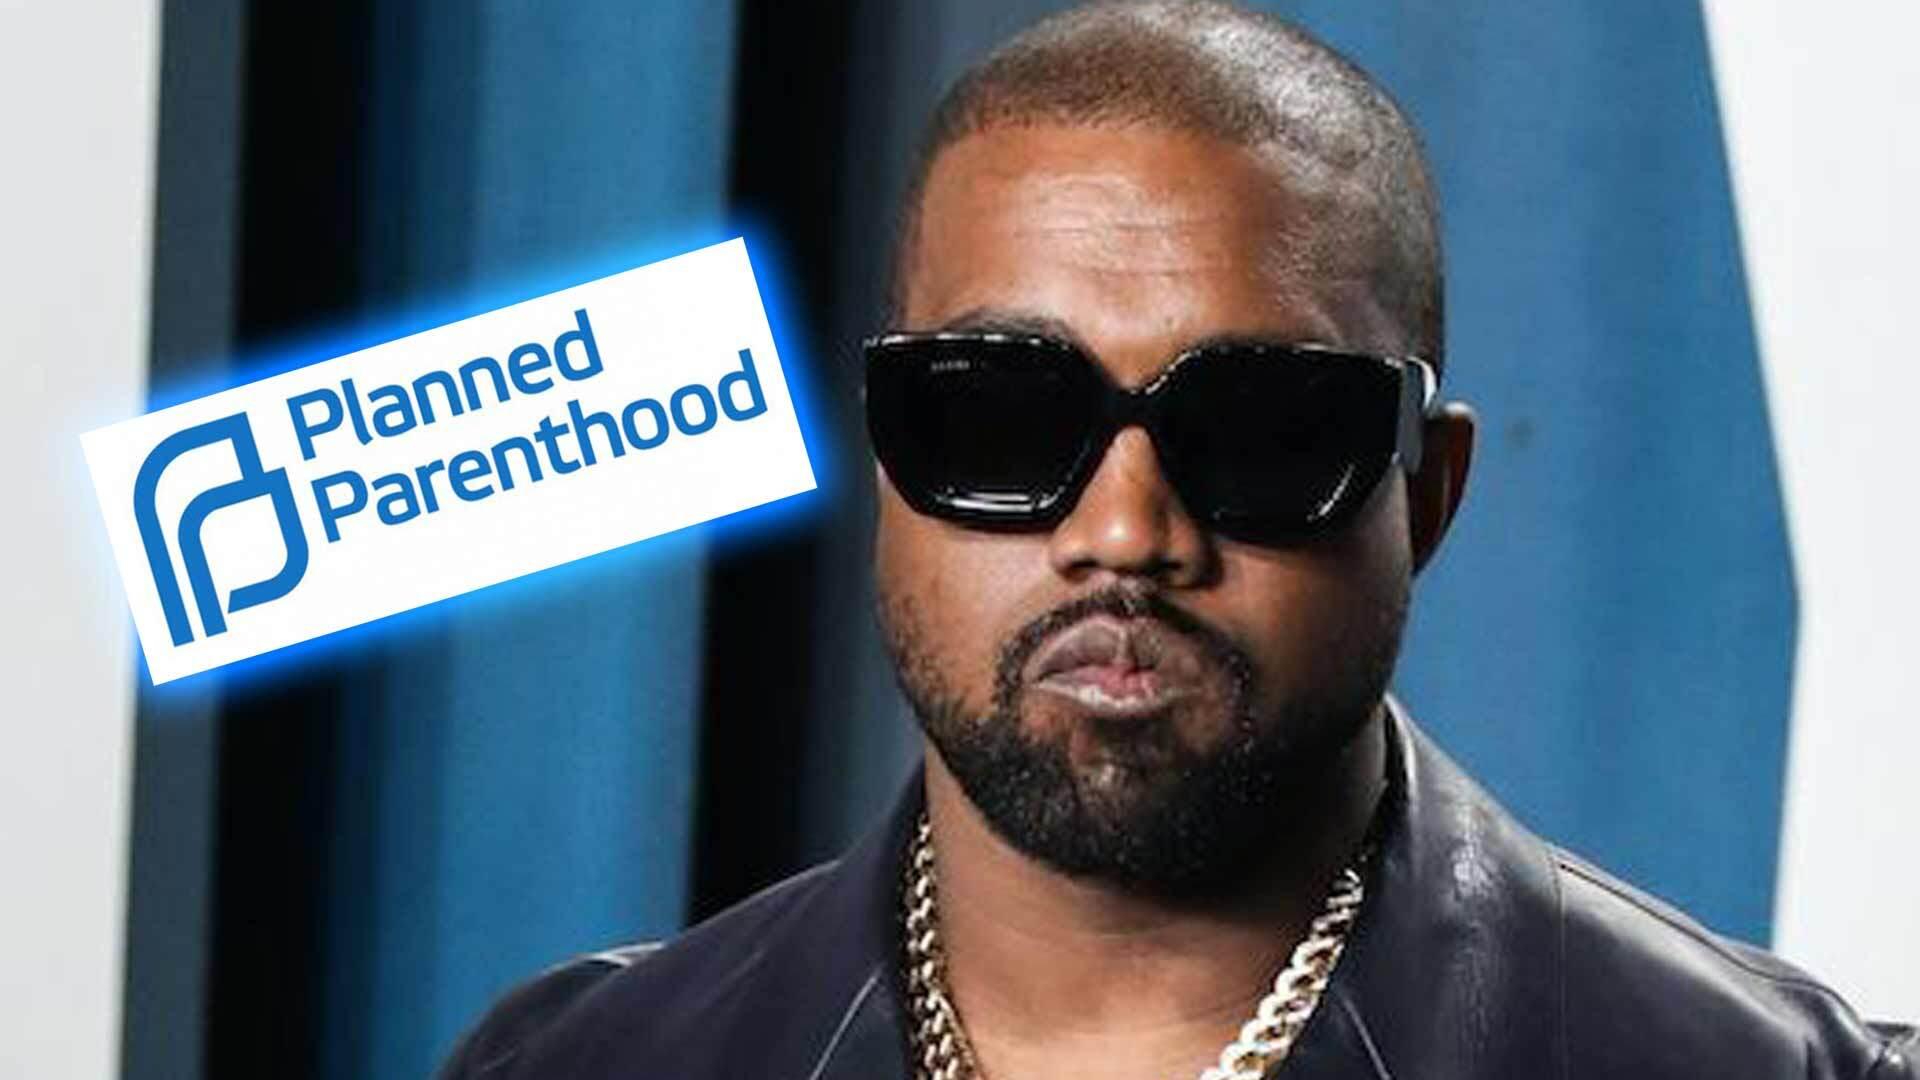 Planned Parenthood Fires Back At Kanye West’s Anti-Abortion Comments